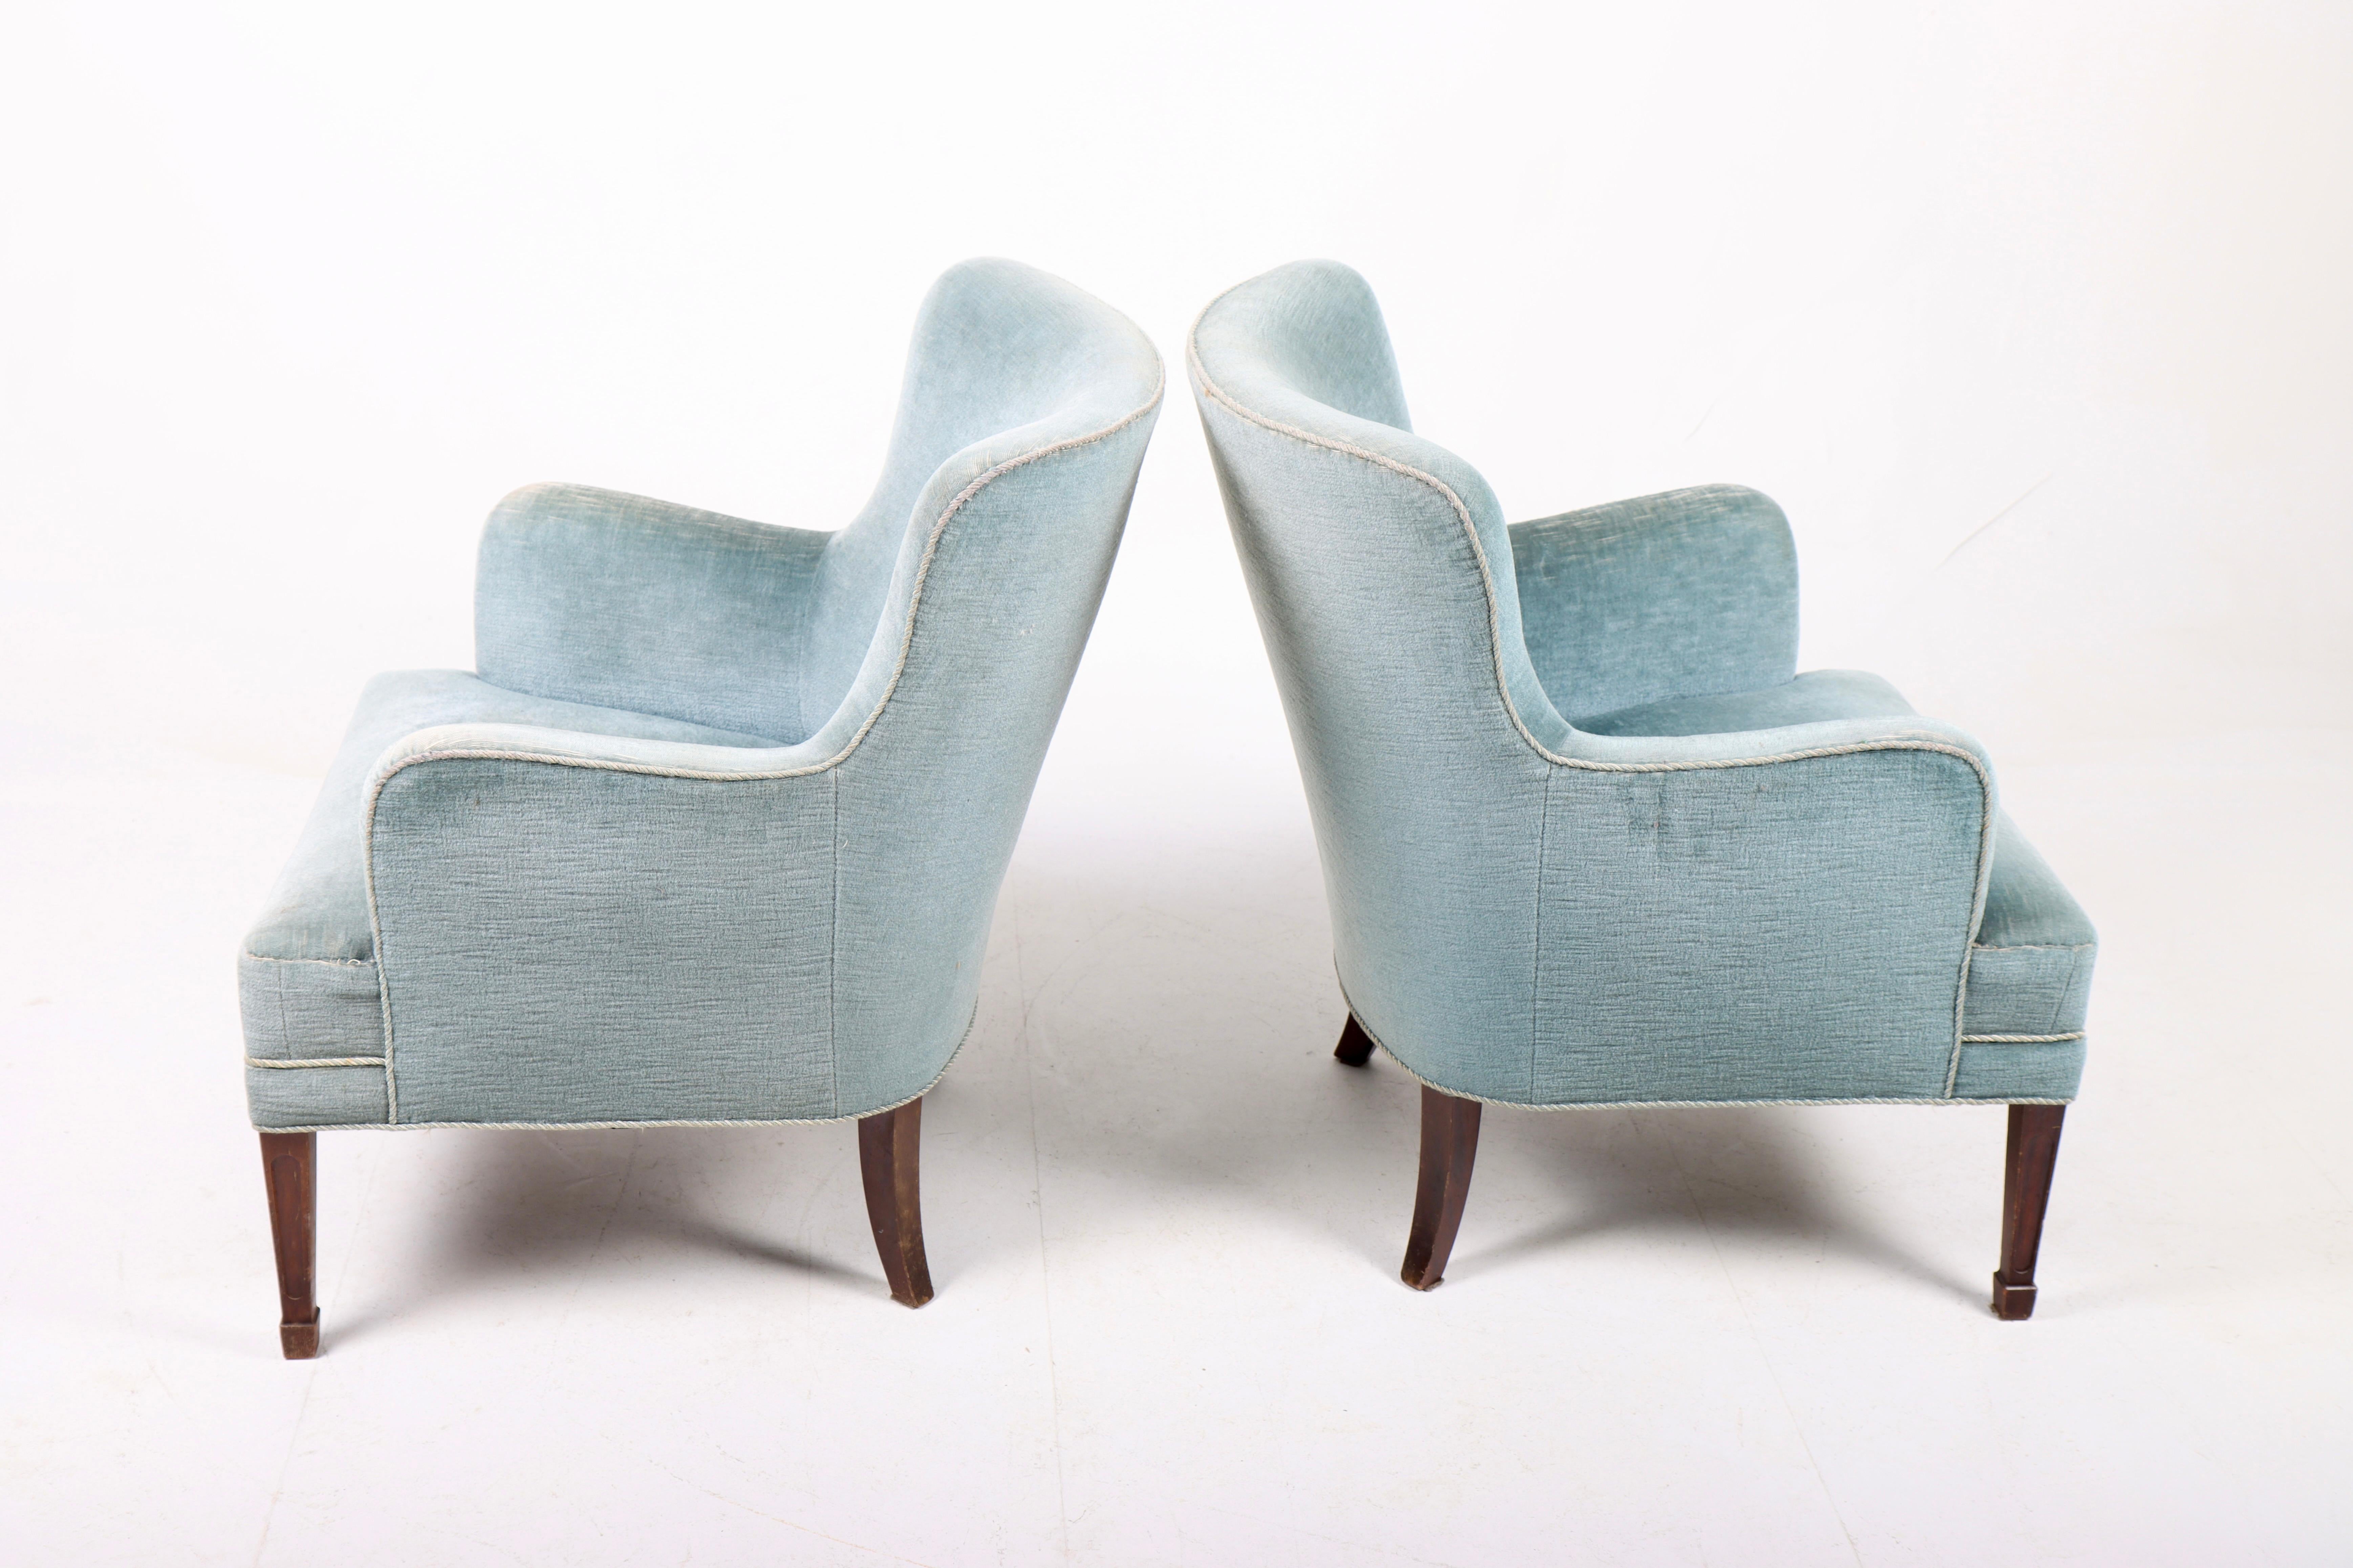 Pair of Classic midcentury lounge chairs upholstered in fabric standing on solid mahogany legs. Designed by Danish architect Frits Henningsen, circa 1940. Made in Denmark. Great original condition.